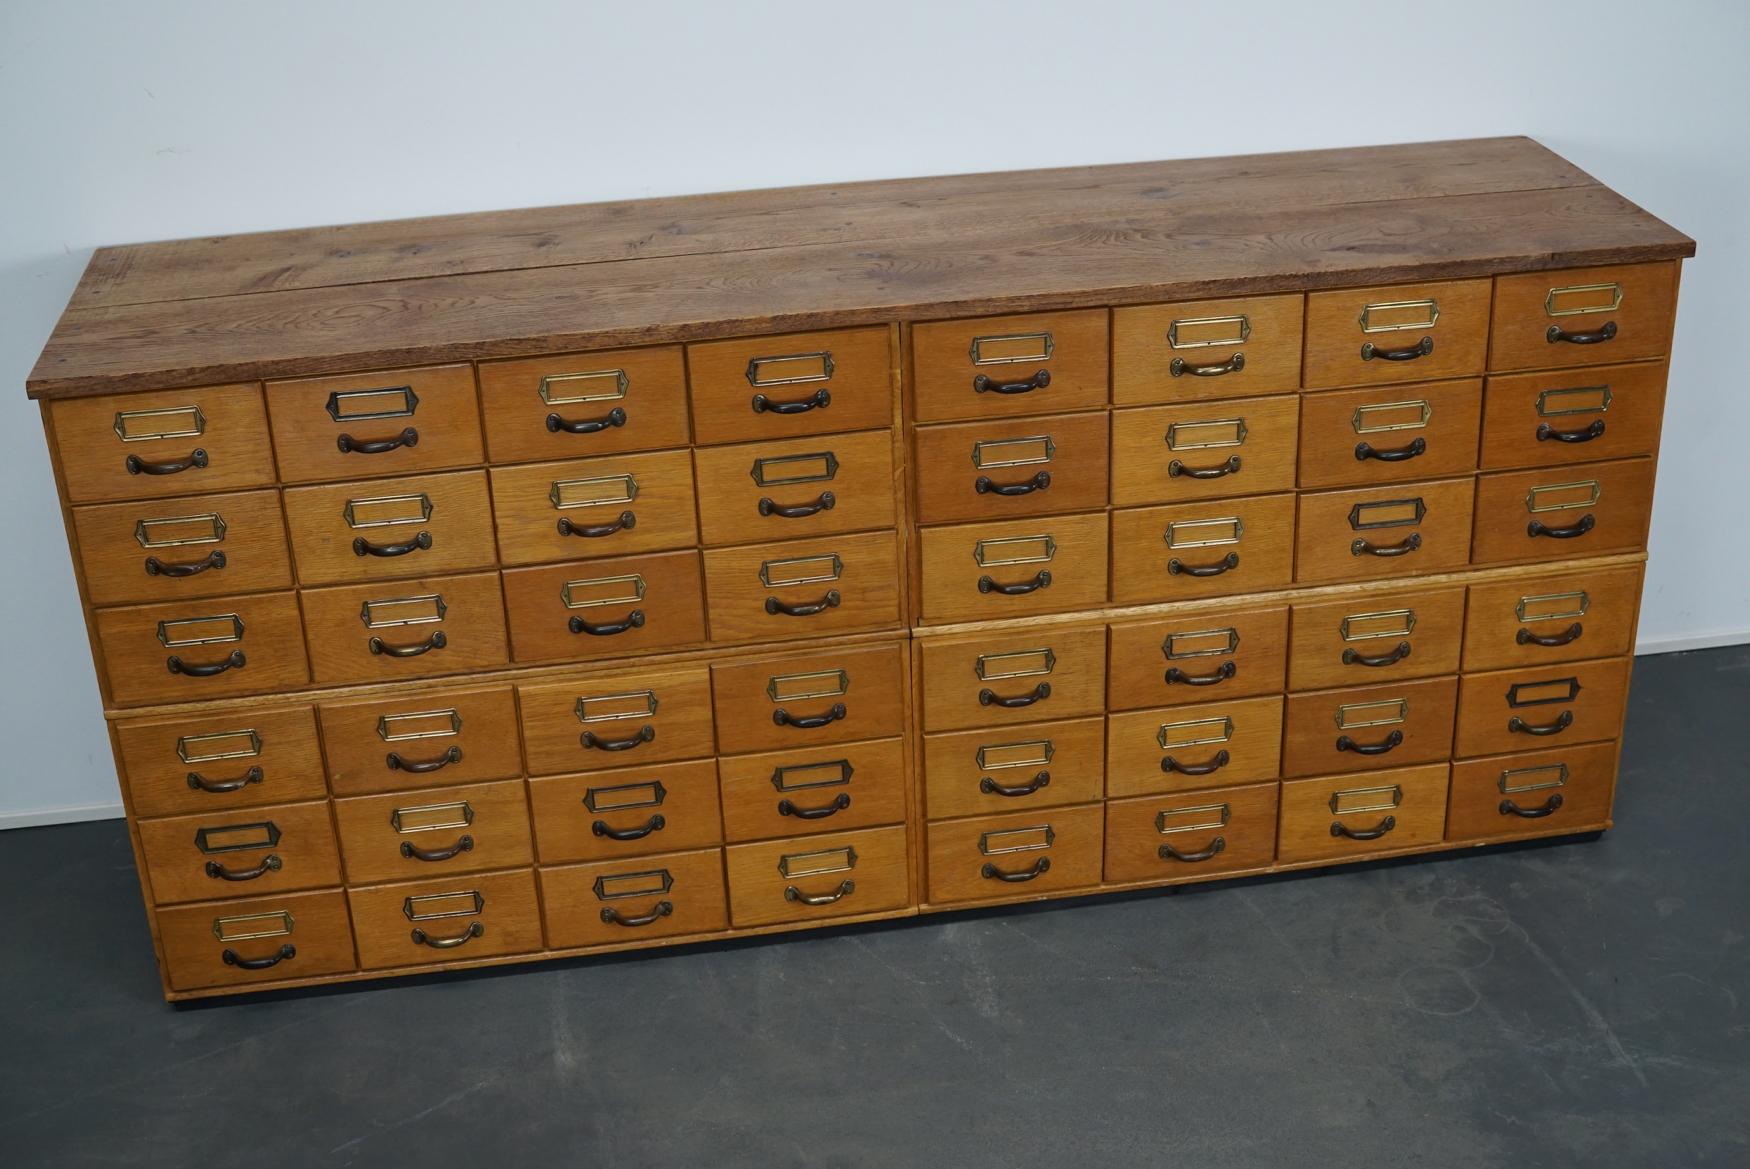 This apothecary cabinet was produced during the 1950s in Germany. This piece features 48 drawers with nice brass card holders and pulls. The interior dimensions of the drawers are: D x W x H 40 x 19 x 4.5 / 9 cm.